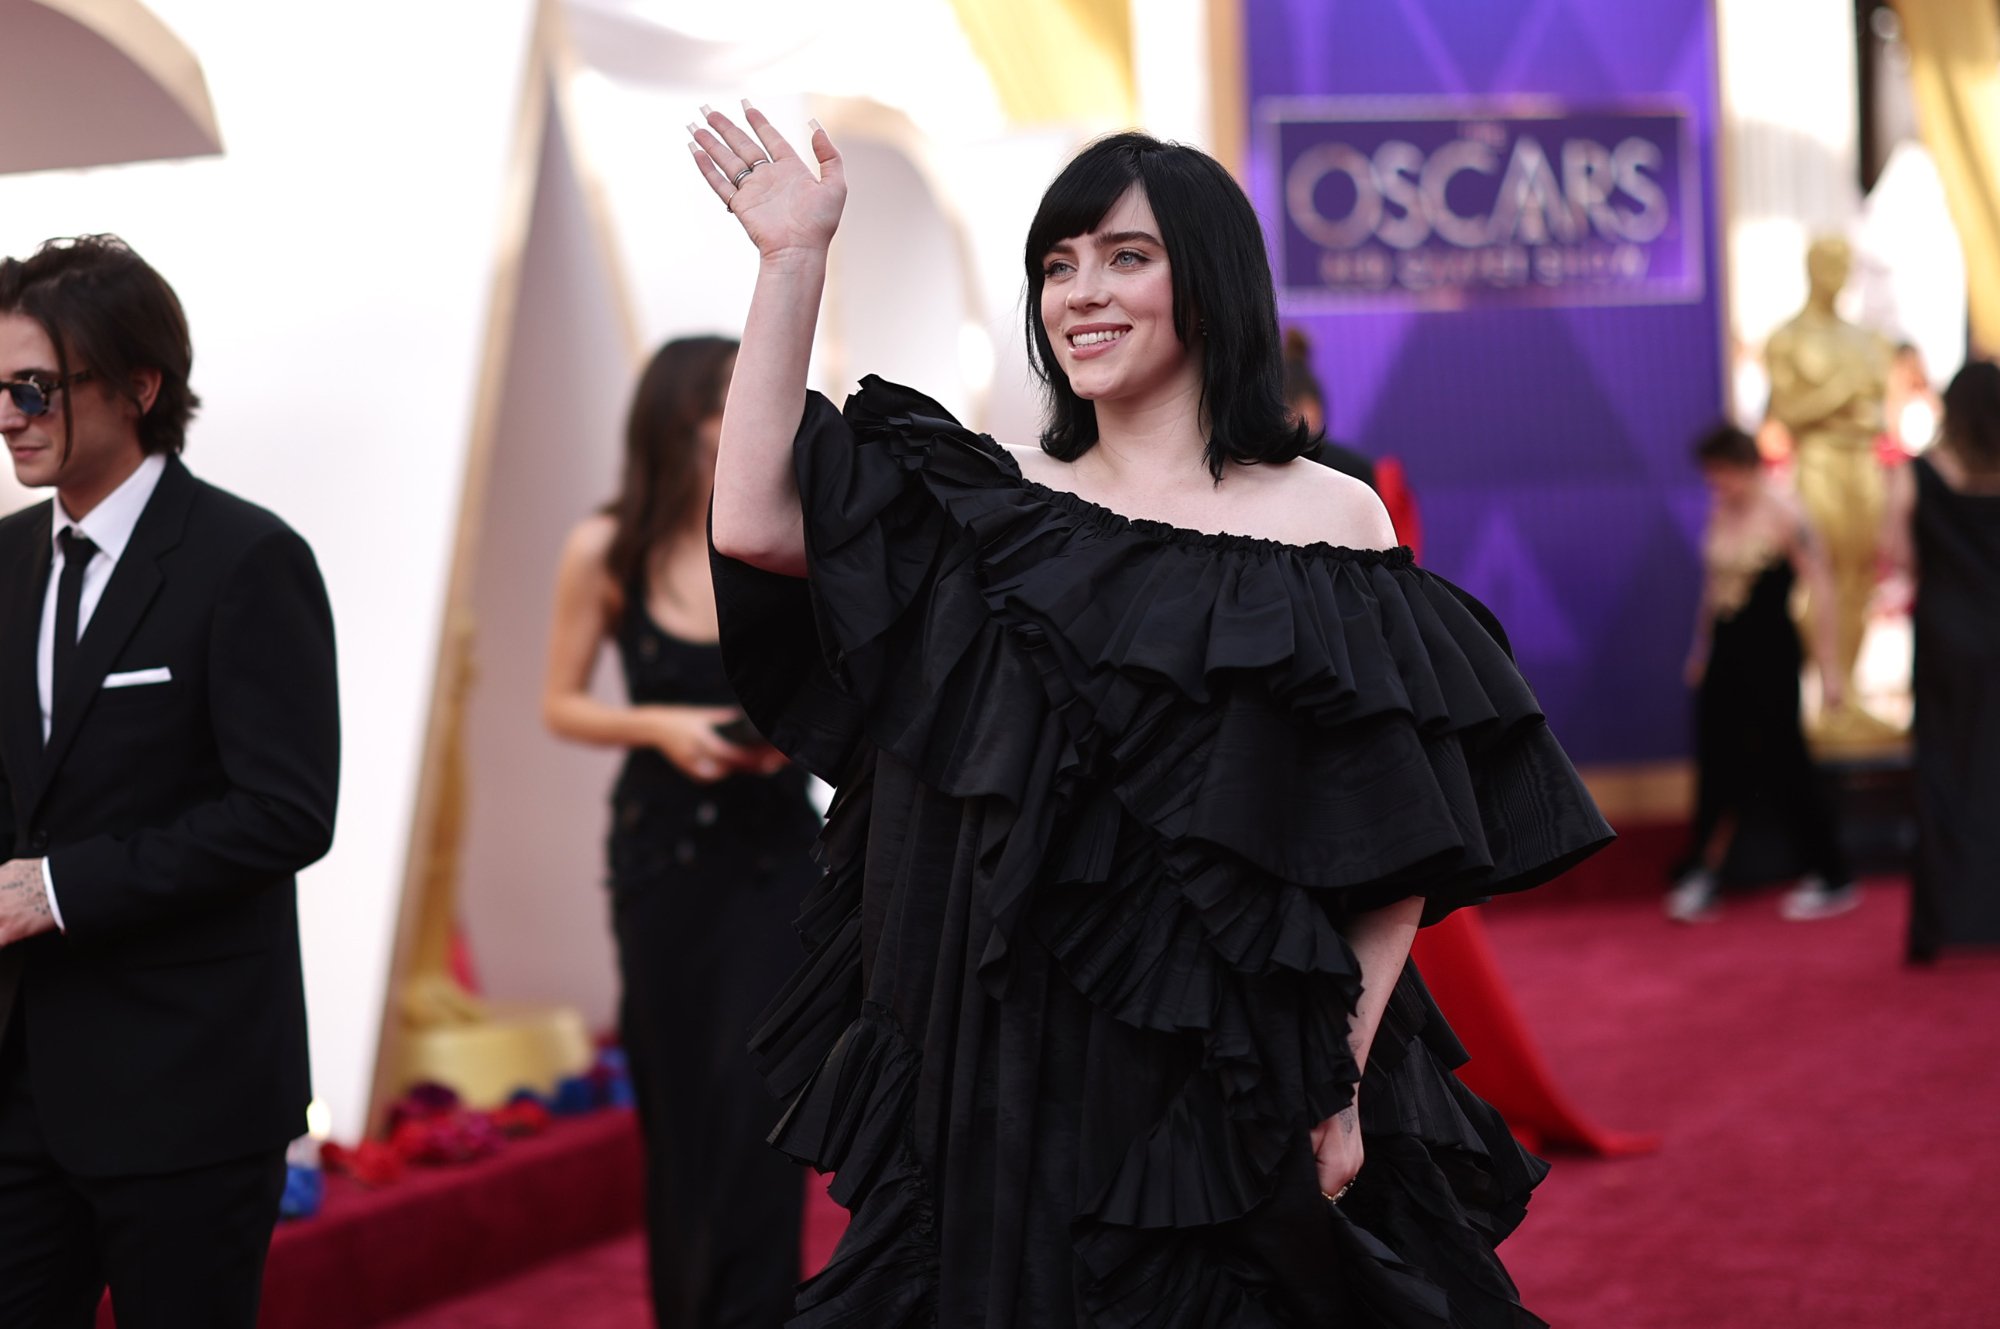 Singer Billie Eilish, who sang the song 'No Time to Die' in the Daniel Craig movie wearing a black dress waving her hand on the Oscars 2022 red carpet